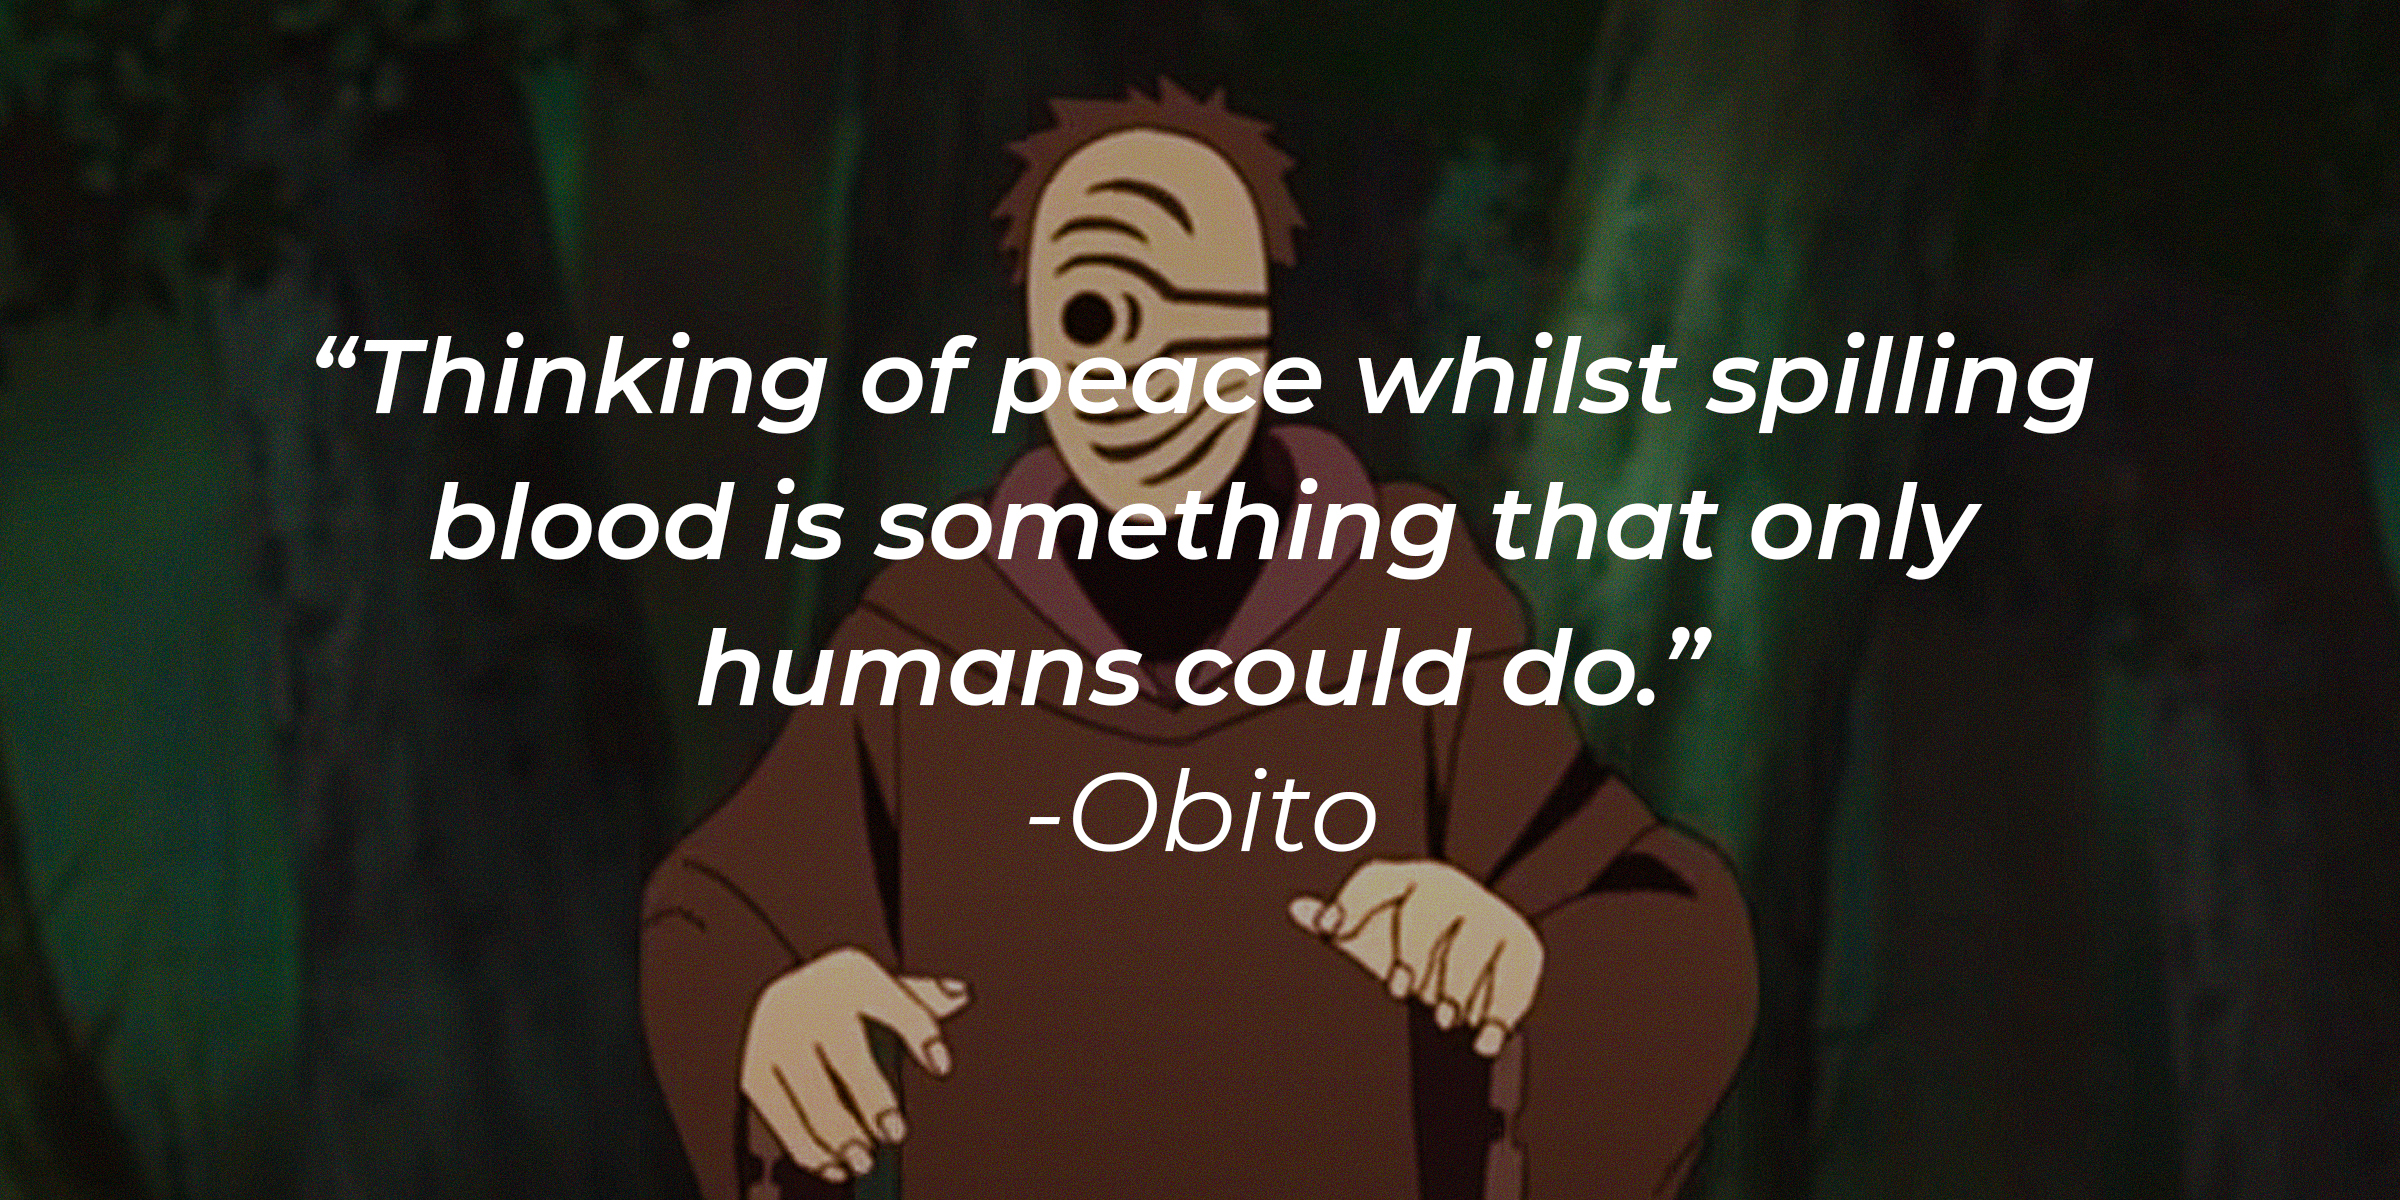 An image of Obito with his quote, “Thinking of peace whilst spilling blood is something that only humans could do.” | Source: youtube.com/CrunchyrollCollectin